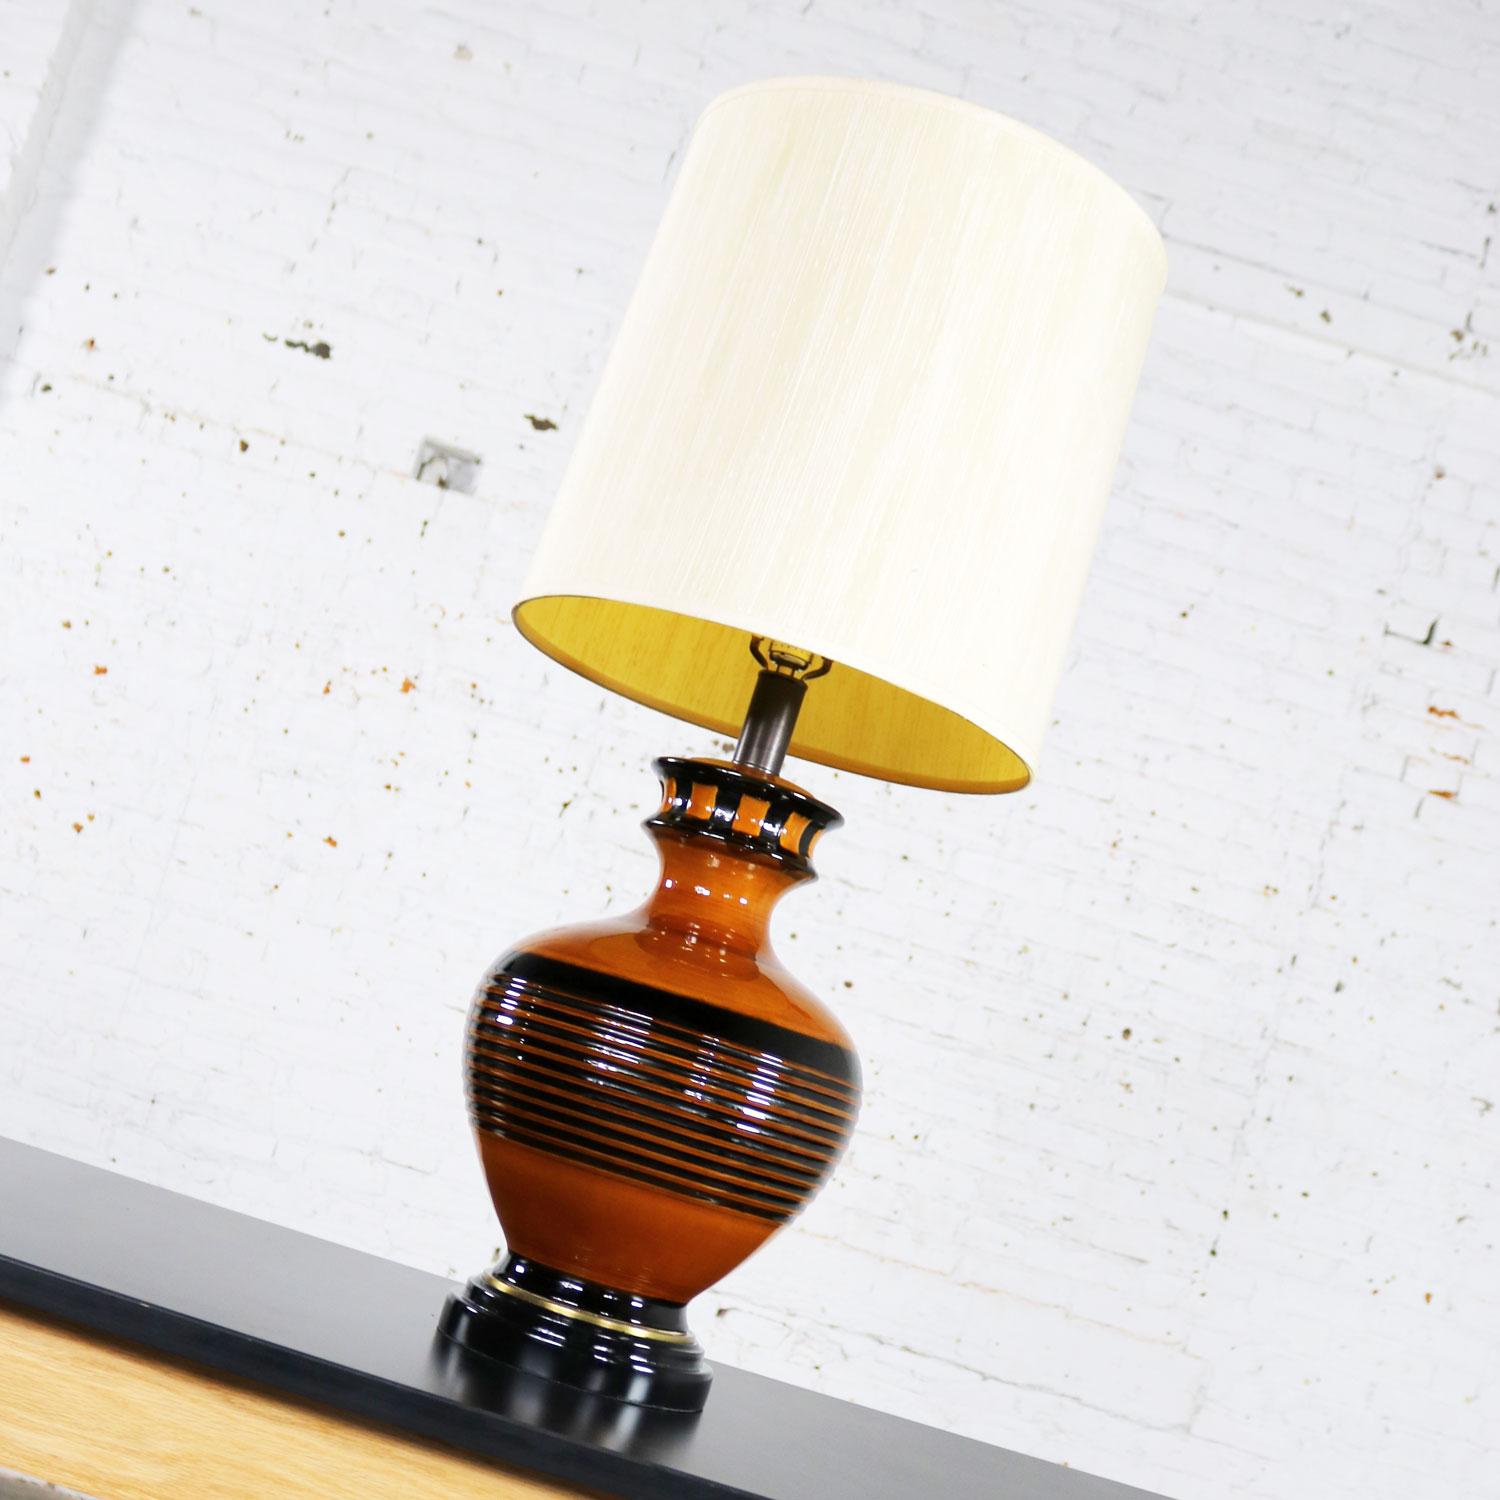 Handsome Mid-Century Modern large brown and black bulbous ceramic lamp. It is in fabulous vintage condition. It wears its original nubby silk-look drum shade which is not without signs of age but still beautiful. The wood base has been restored and